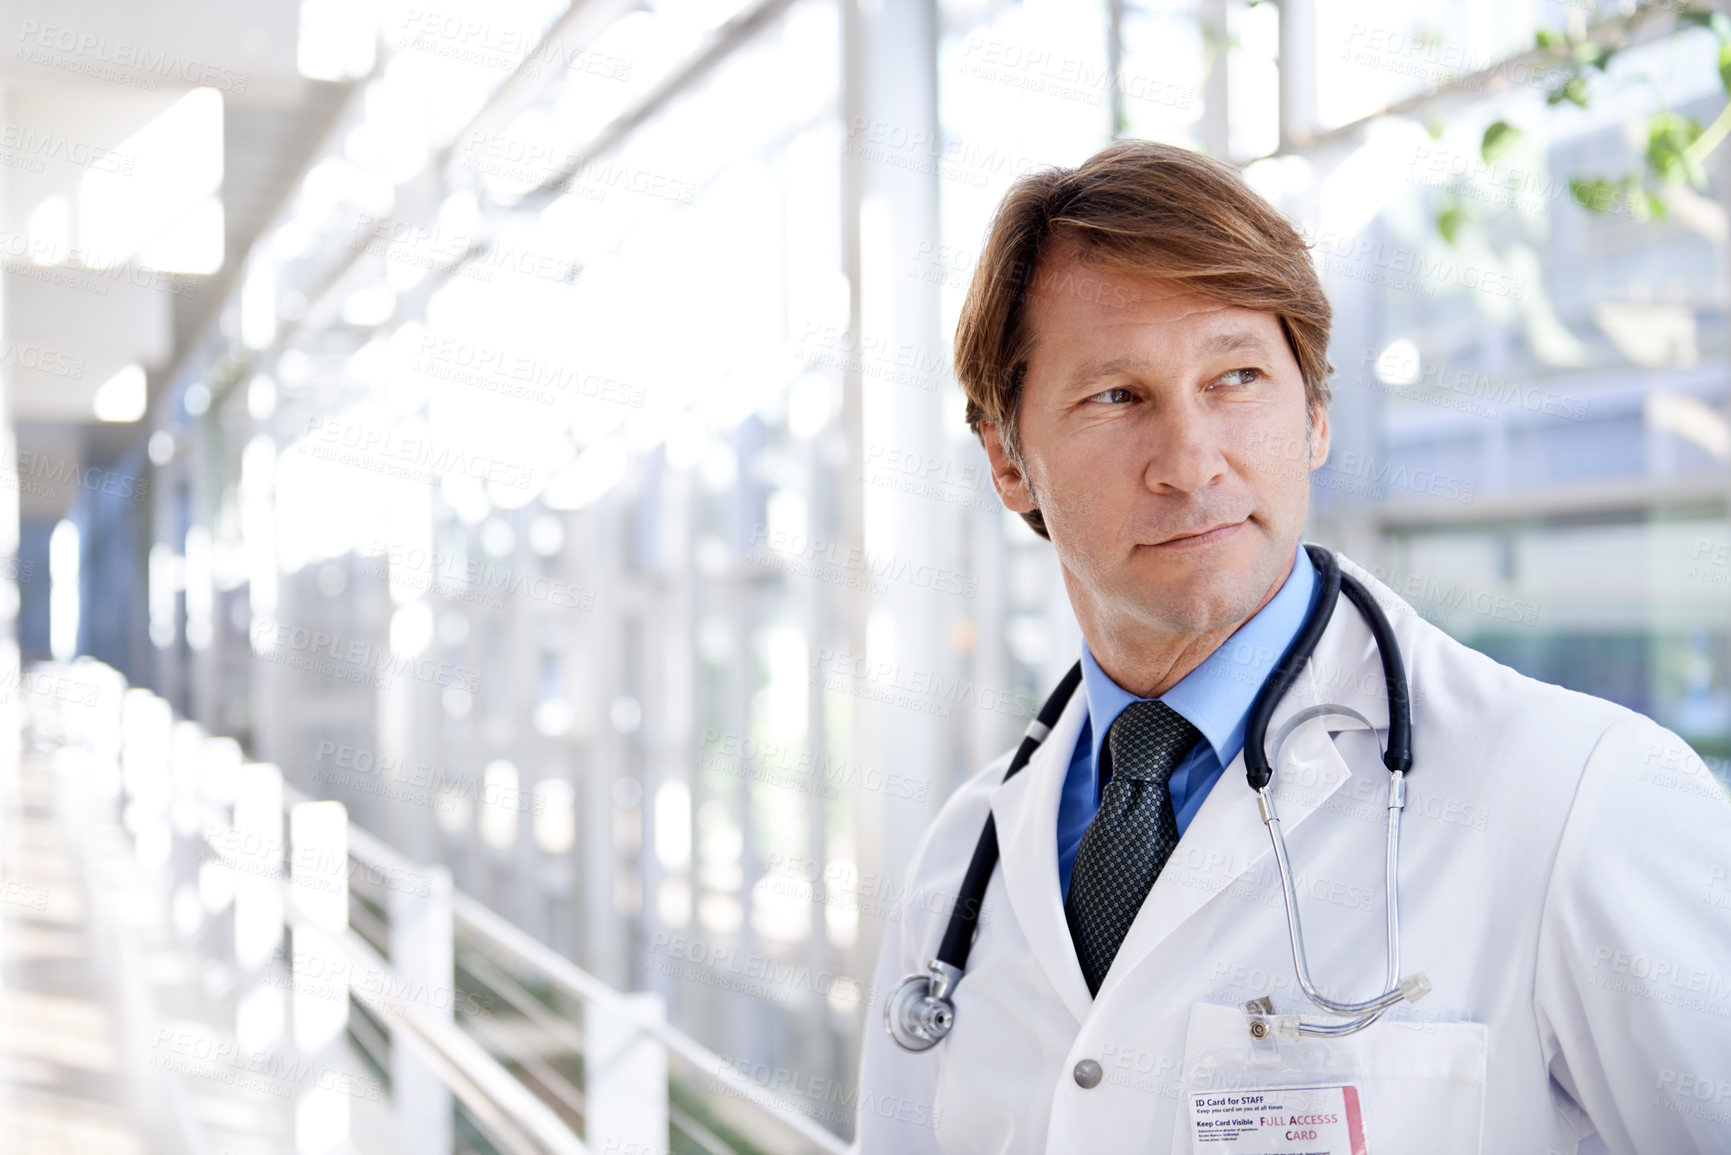 Buy stock photo Thinking, ideas and man doctor in hospital planning a medical diagnosis or treatment. Brainstorming, problem solving and professional mature male healthcare worker in medicare clinic corridor.